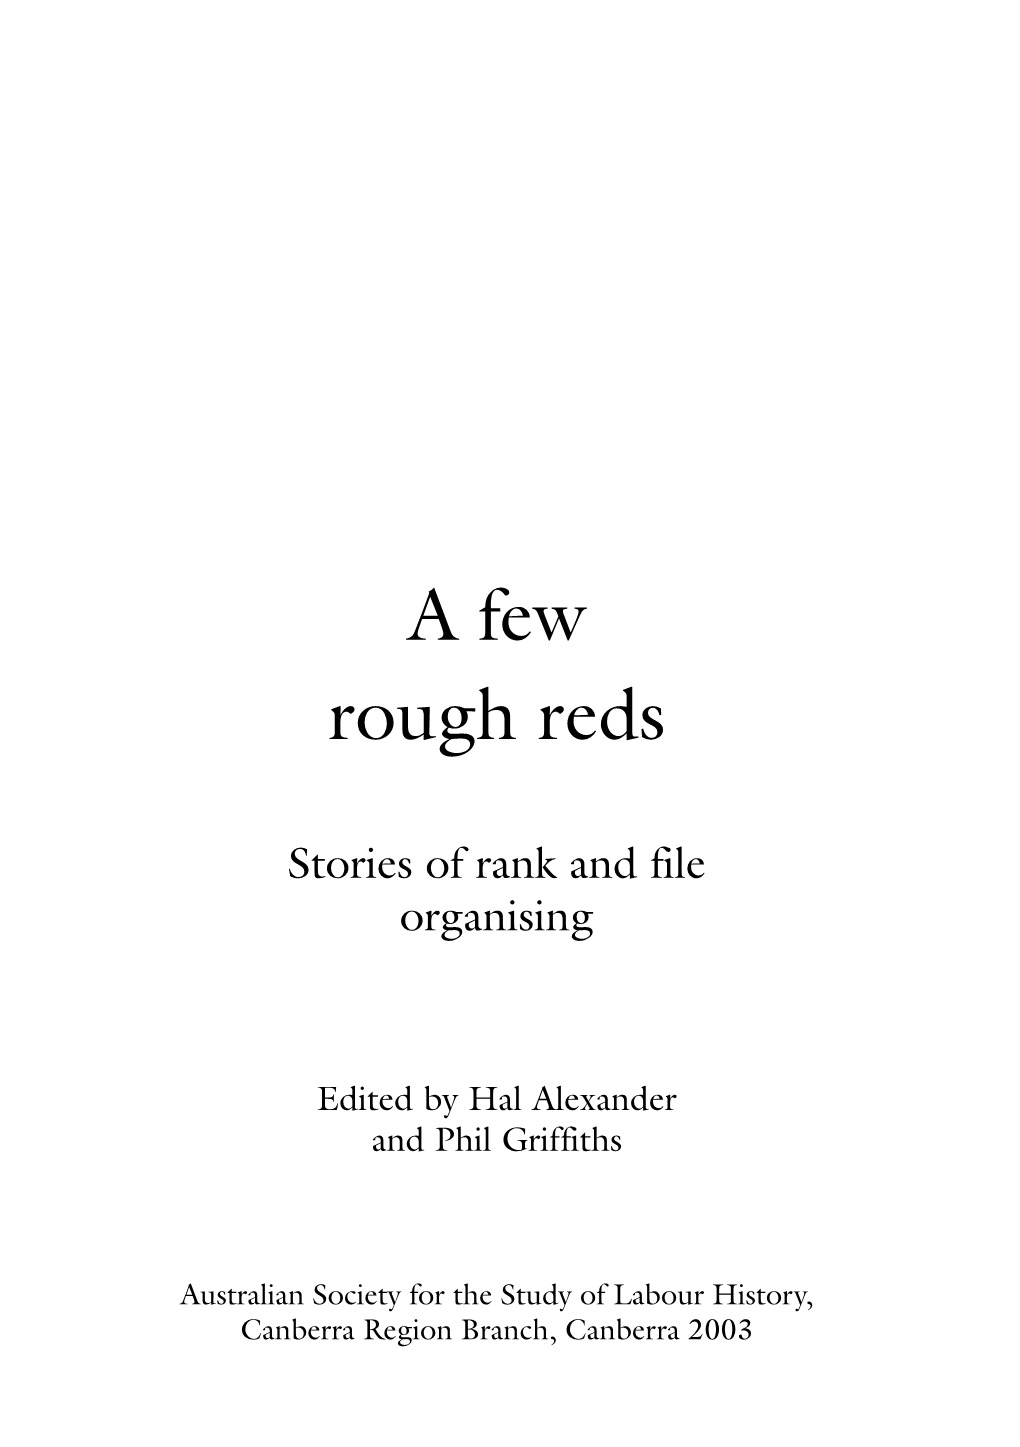 Complete Rough Reds Booklet